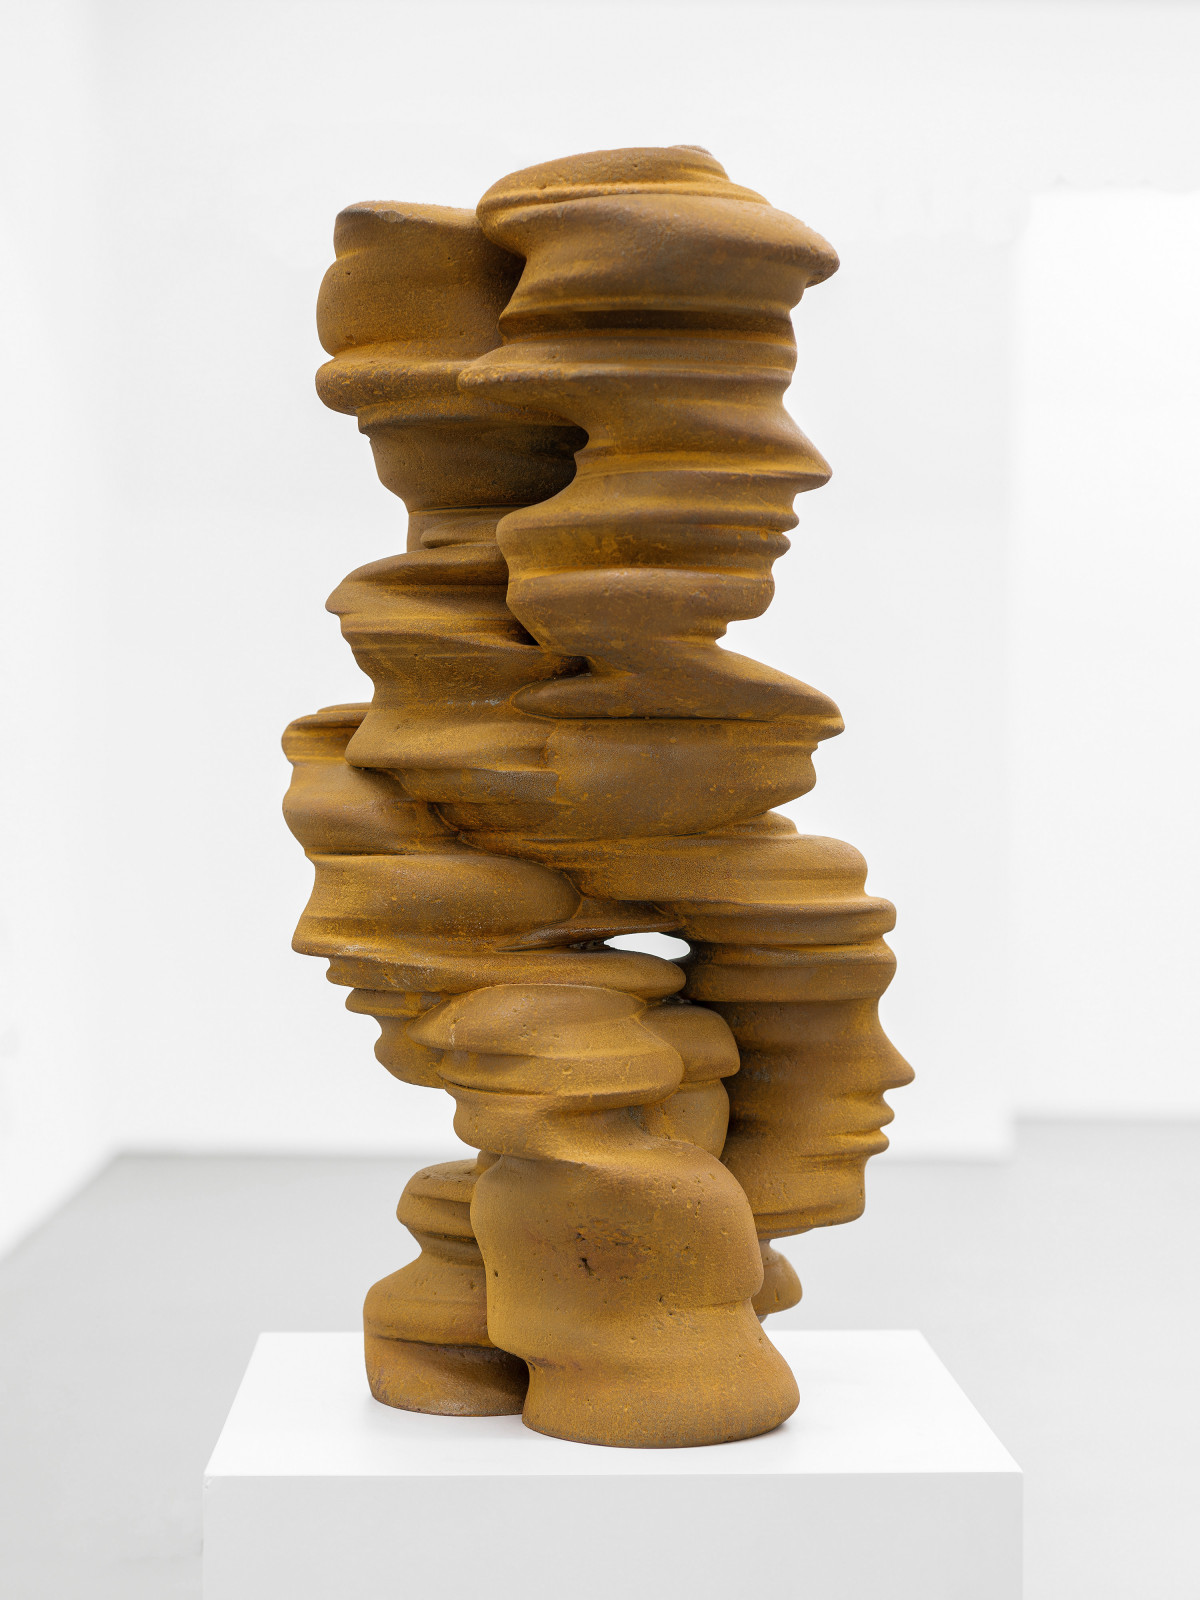 Tony Cragg, ‘Not yet titled’, 2010